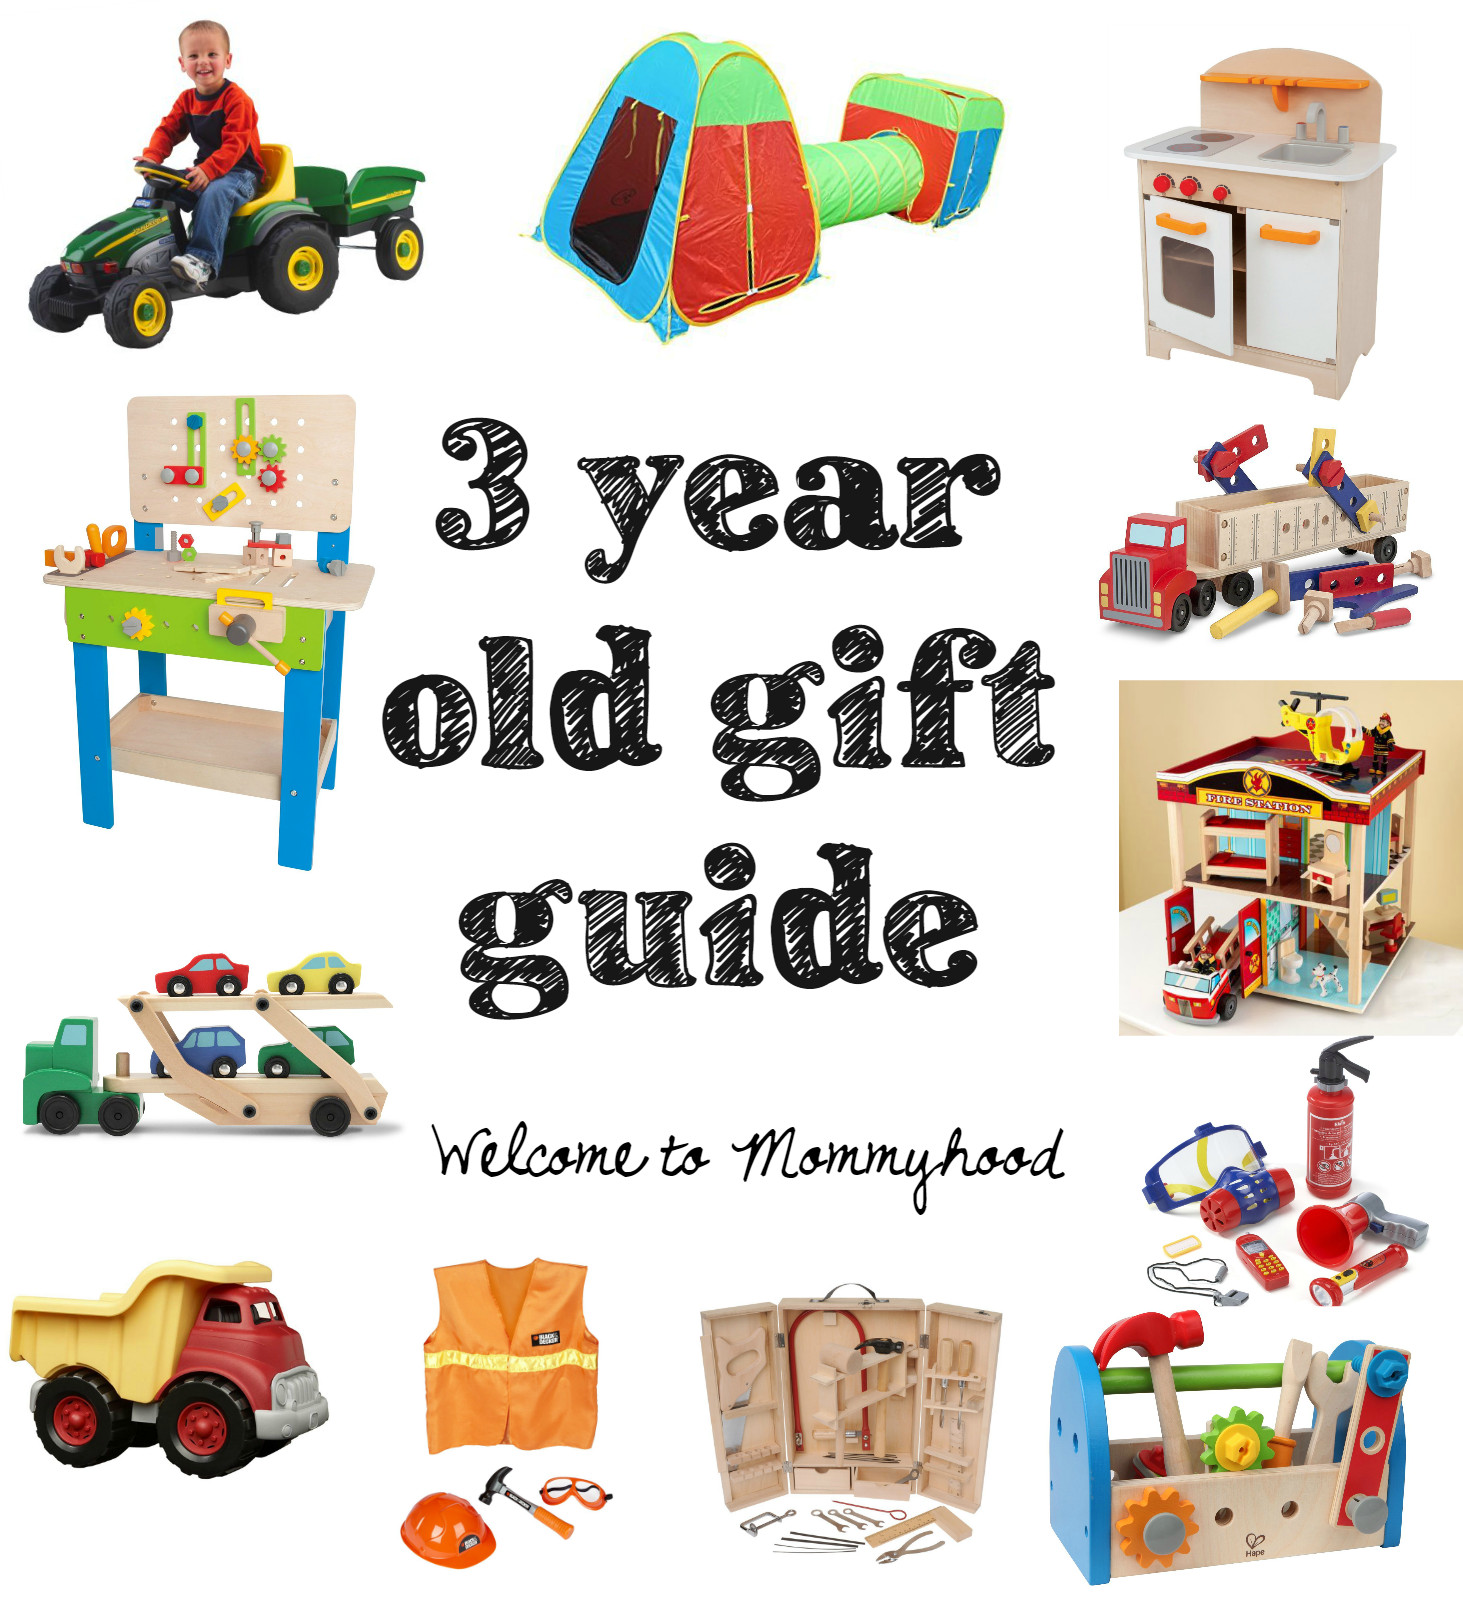 Christmas Gift Ideas For 3 Year Old Boy
 Gift guide for three year old boys from Wel e to